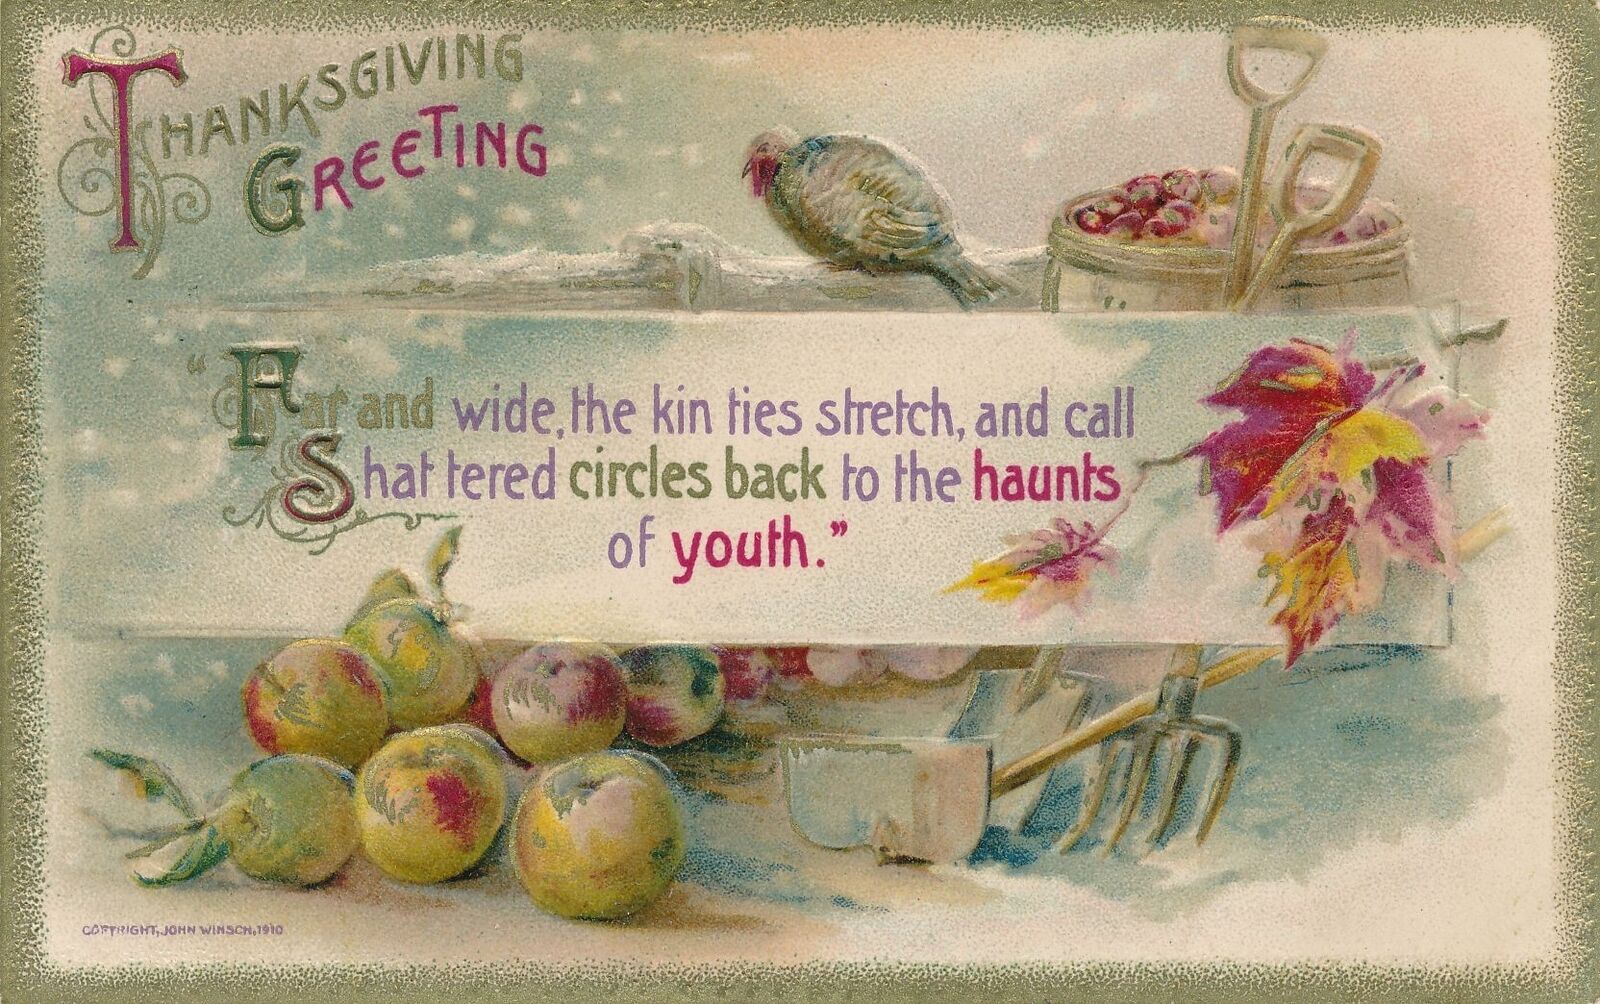 THANKSGIVING - Far And Wide The Kin Ties Stretch Winsch Postcard - 1910